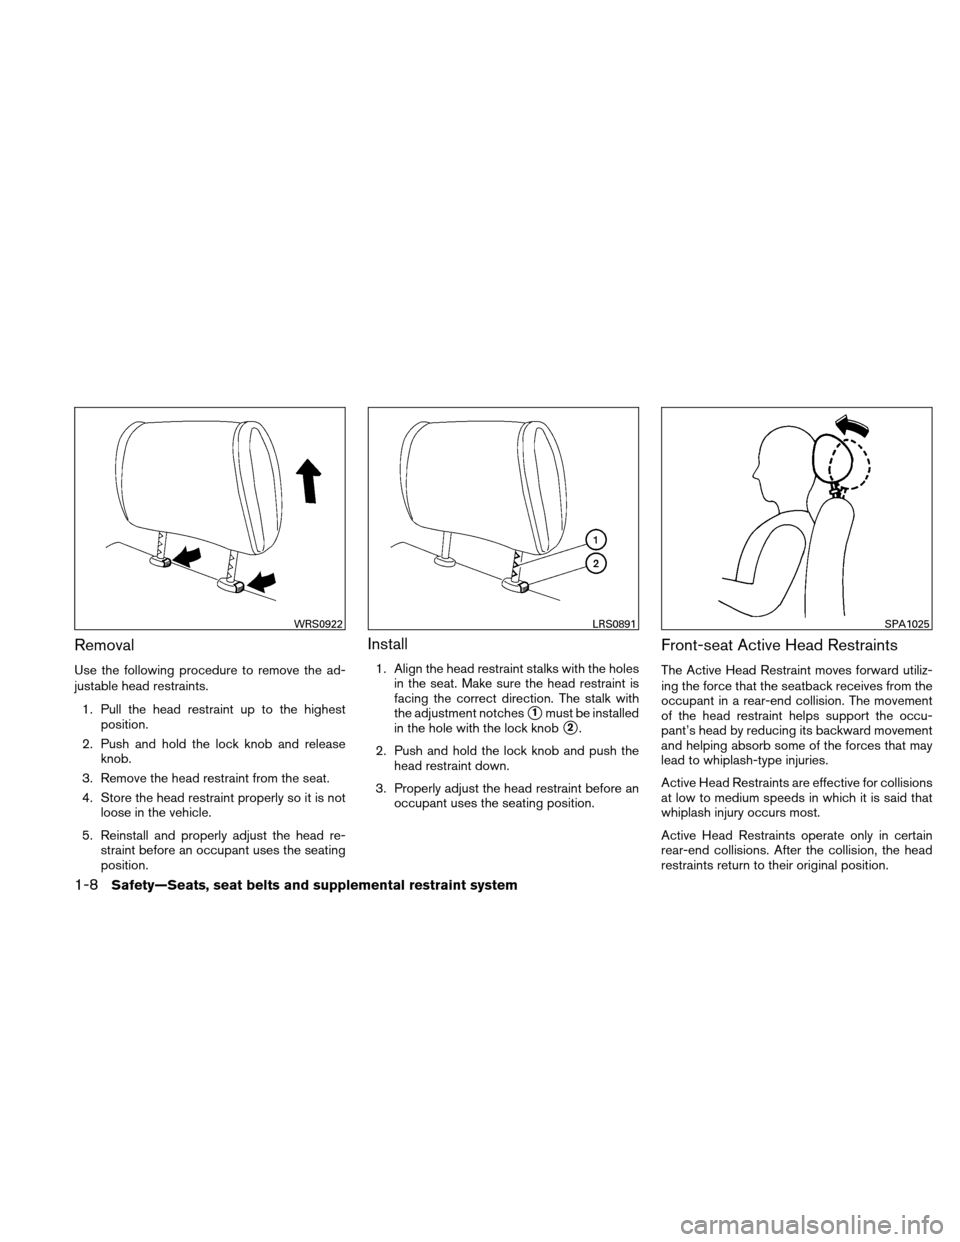 NISSAN ALTIMA HYBRID 2010 L32A / 4.G Owners Guide Removal
Use the following procedure to remove the ad-
justable head restraints.1. Pull the head restraint up to the highest position.
2. Push and hold the lock knob and release knob.
3. Remove the hea